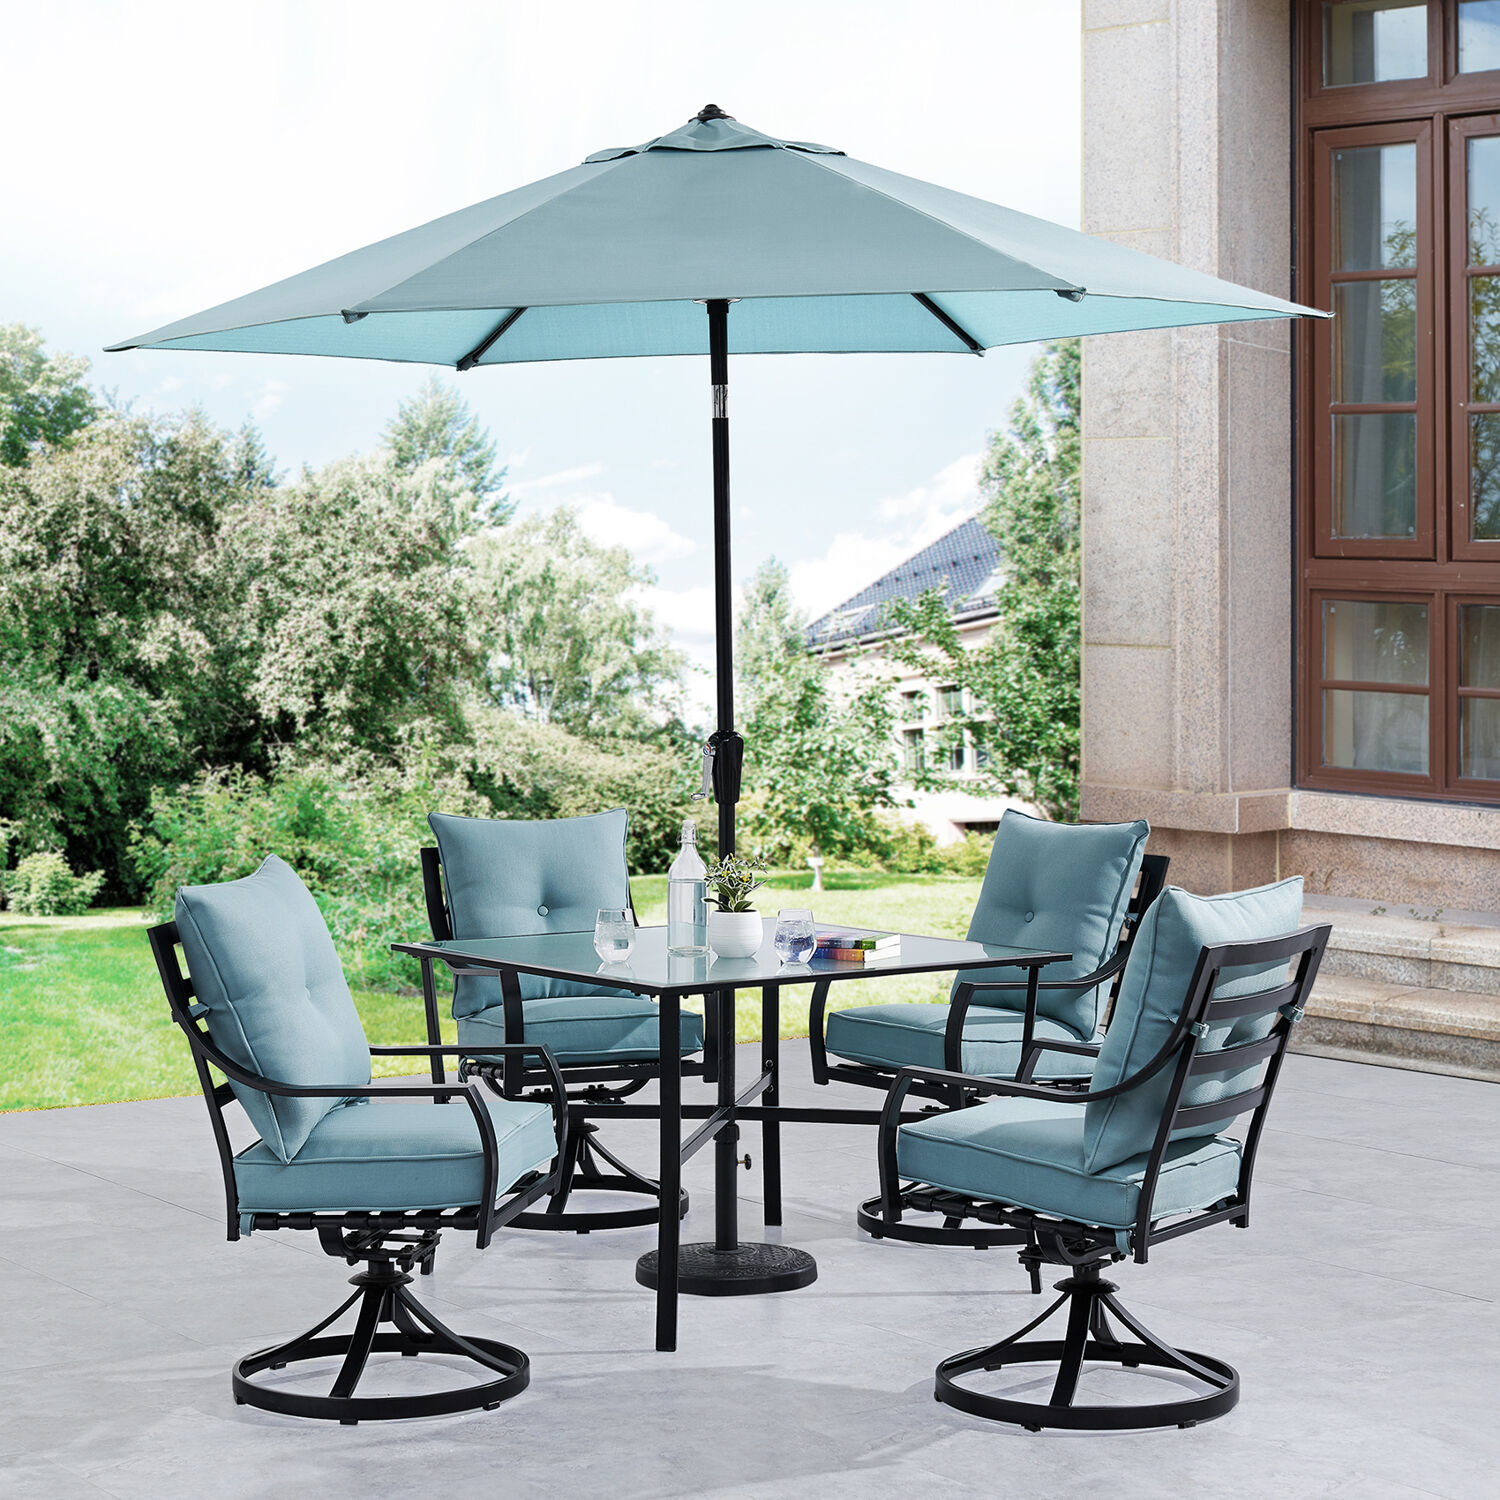 Hanover Lavallette 5-Piece Modern Outdoor Dining Set with Umbrella - image 3 of 14